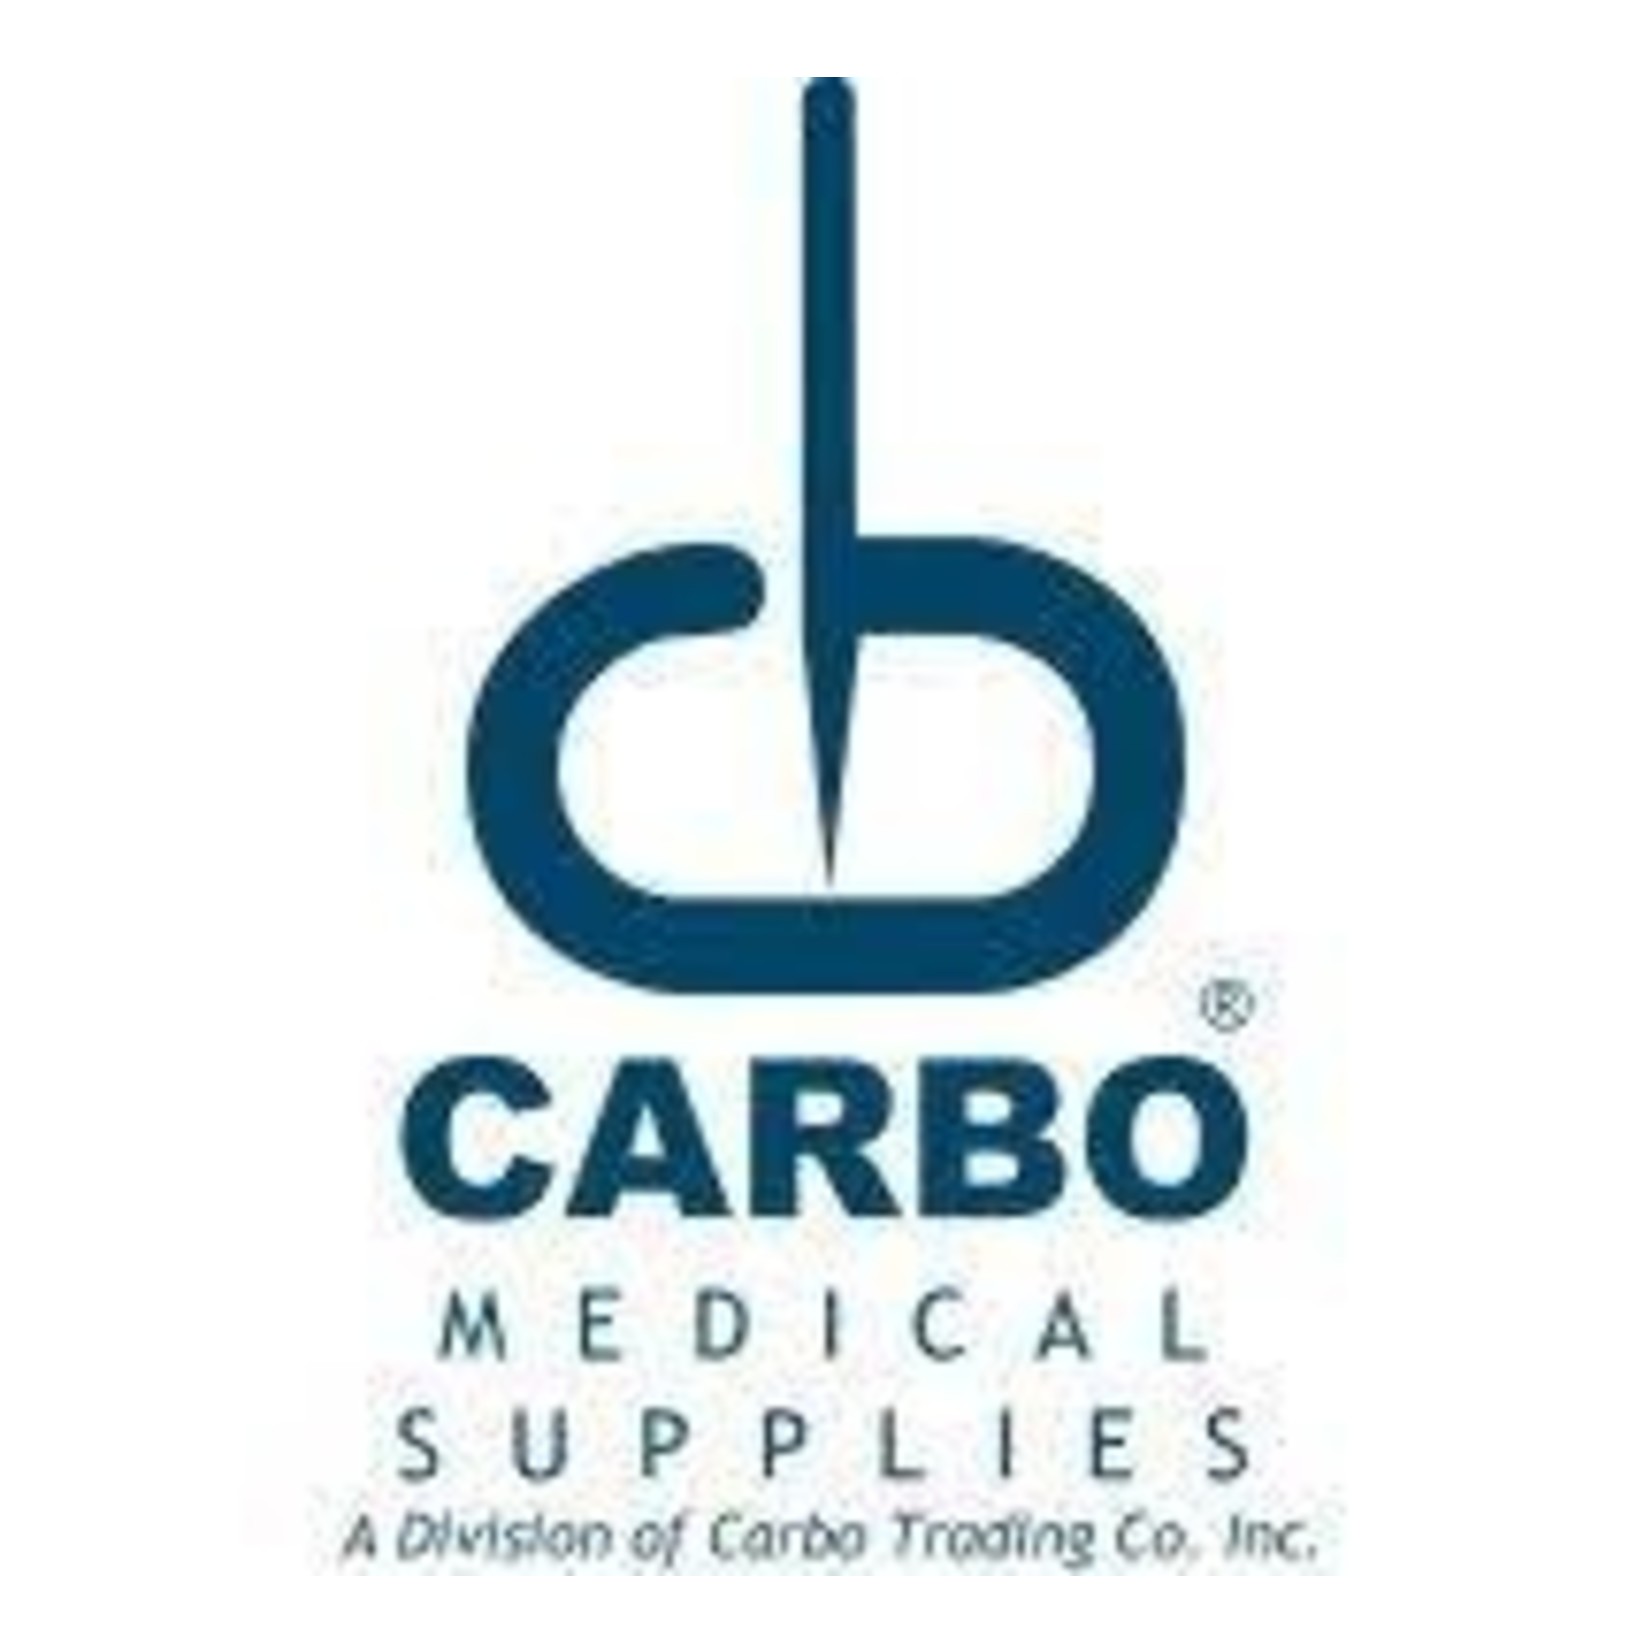 CARBO CARBO ACUPUNCTURE NEEDLE .20 x 15mm 100 PACK